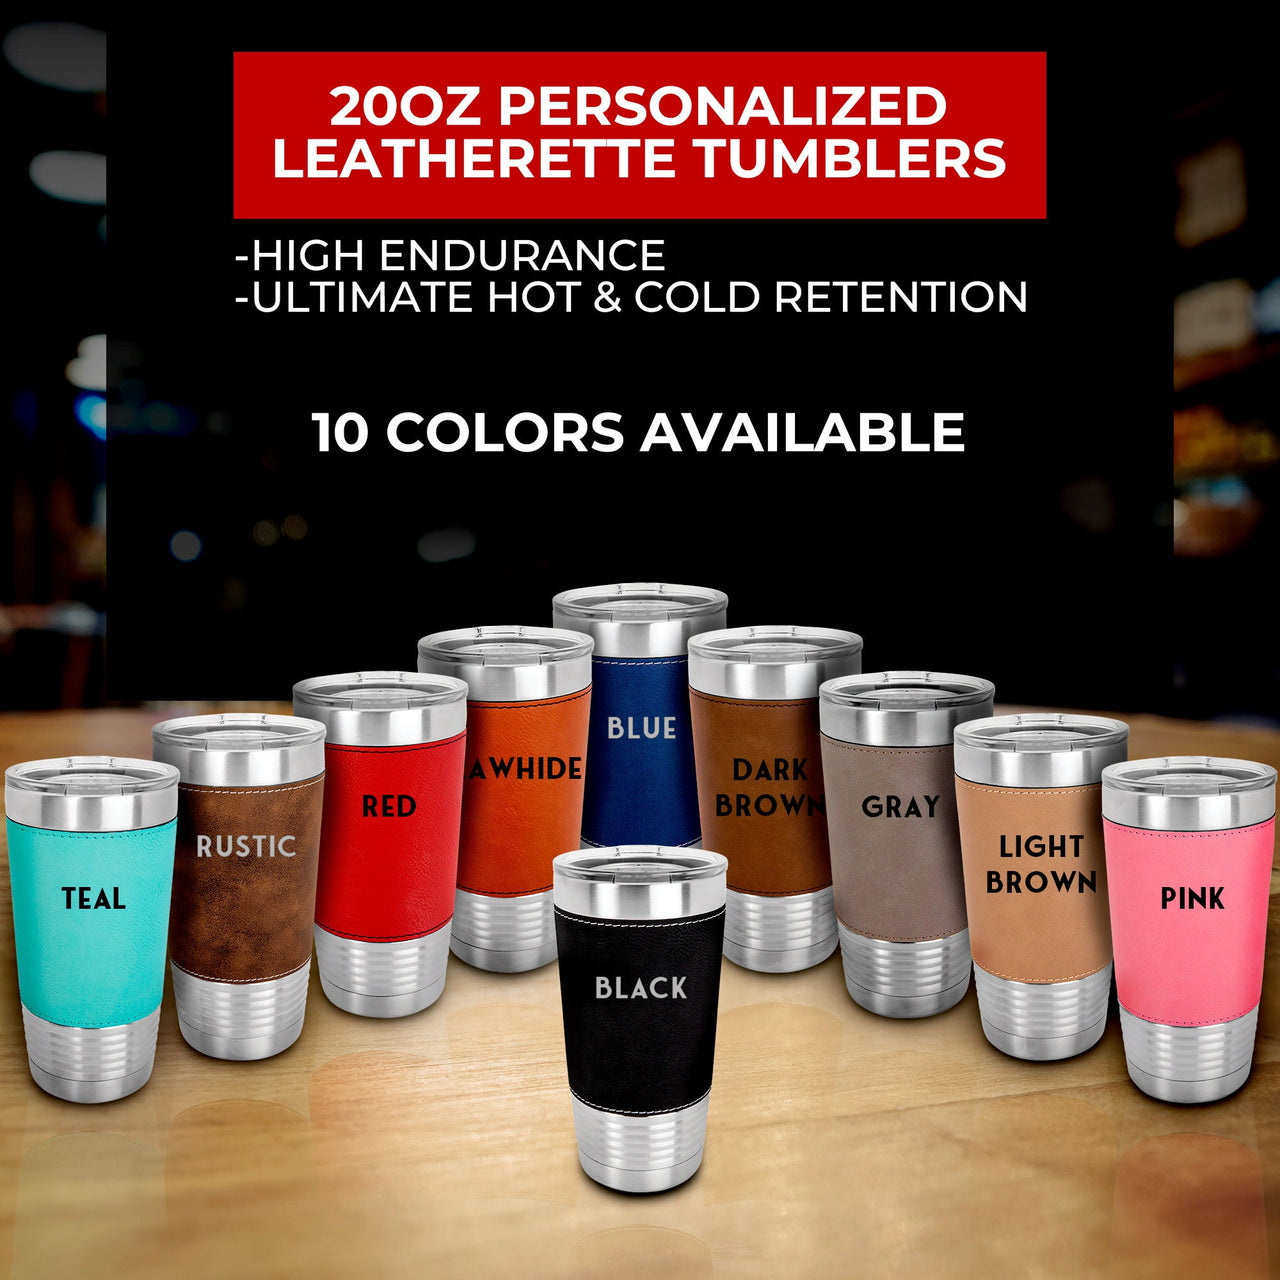 Premium Custom YOUR TEXT Leatherette Tumbler, Personalized 20 oz Tumblers Gift for Him, Custom Your Text Leather Tumbler Gift for Dad